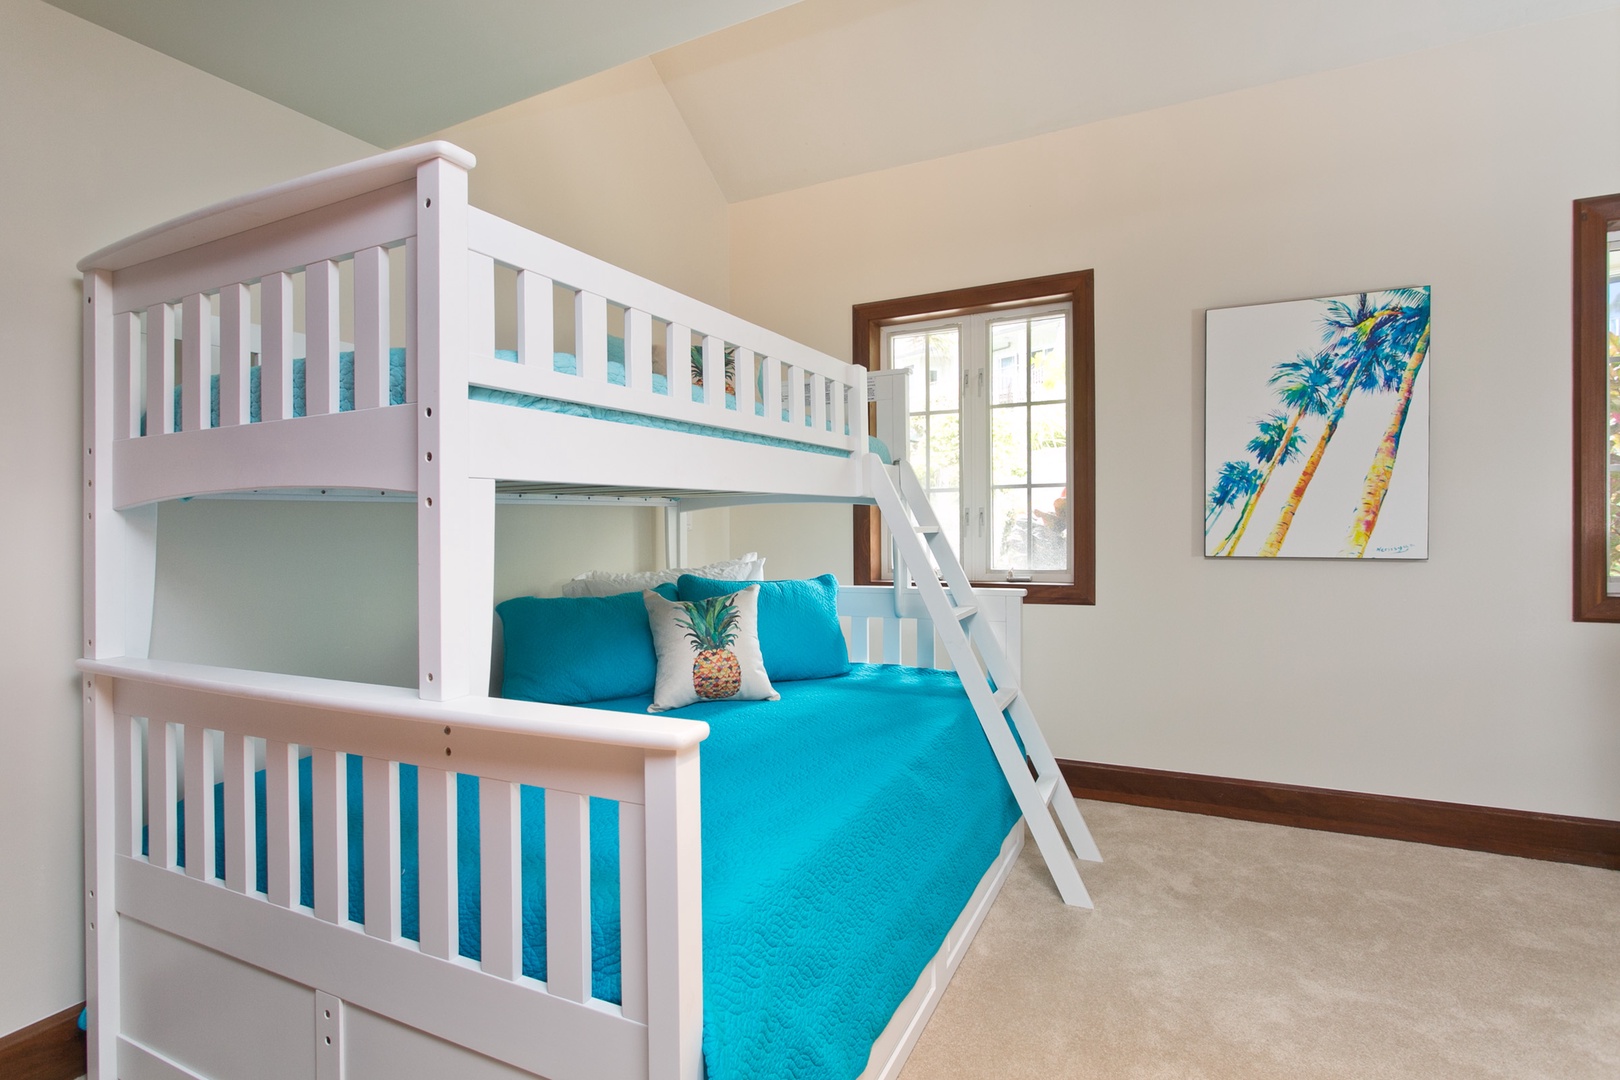 Kailua Vacation Rentals, Hale Melia* - Twin over double trundle bunk bed.